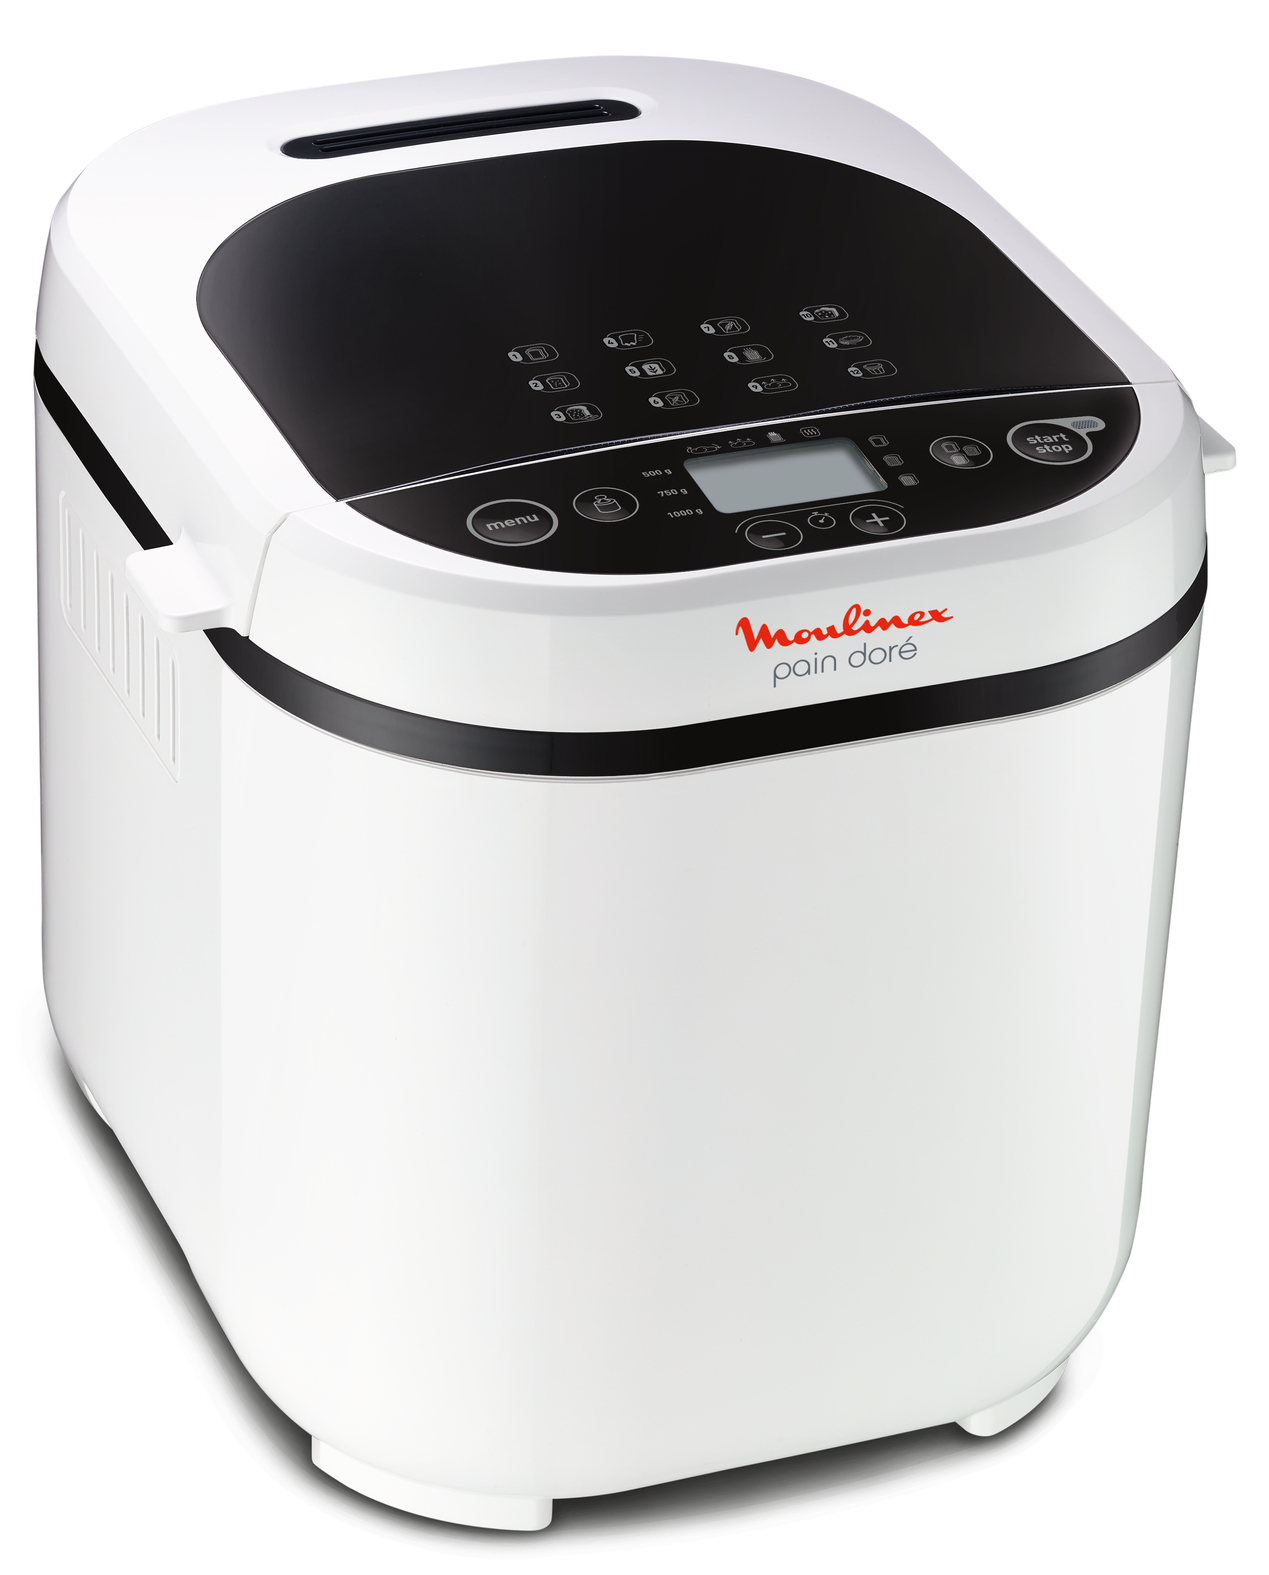 Moulinex broodoven ow210130